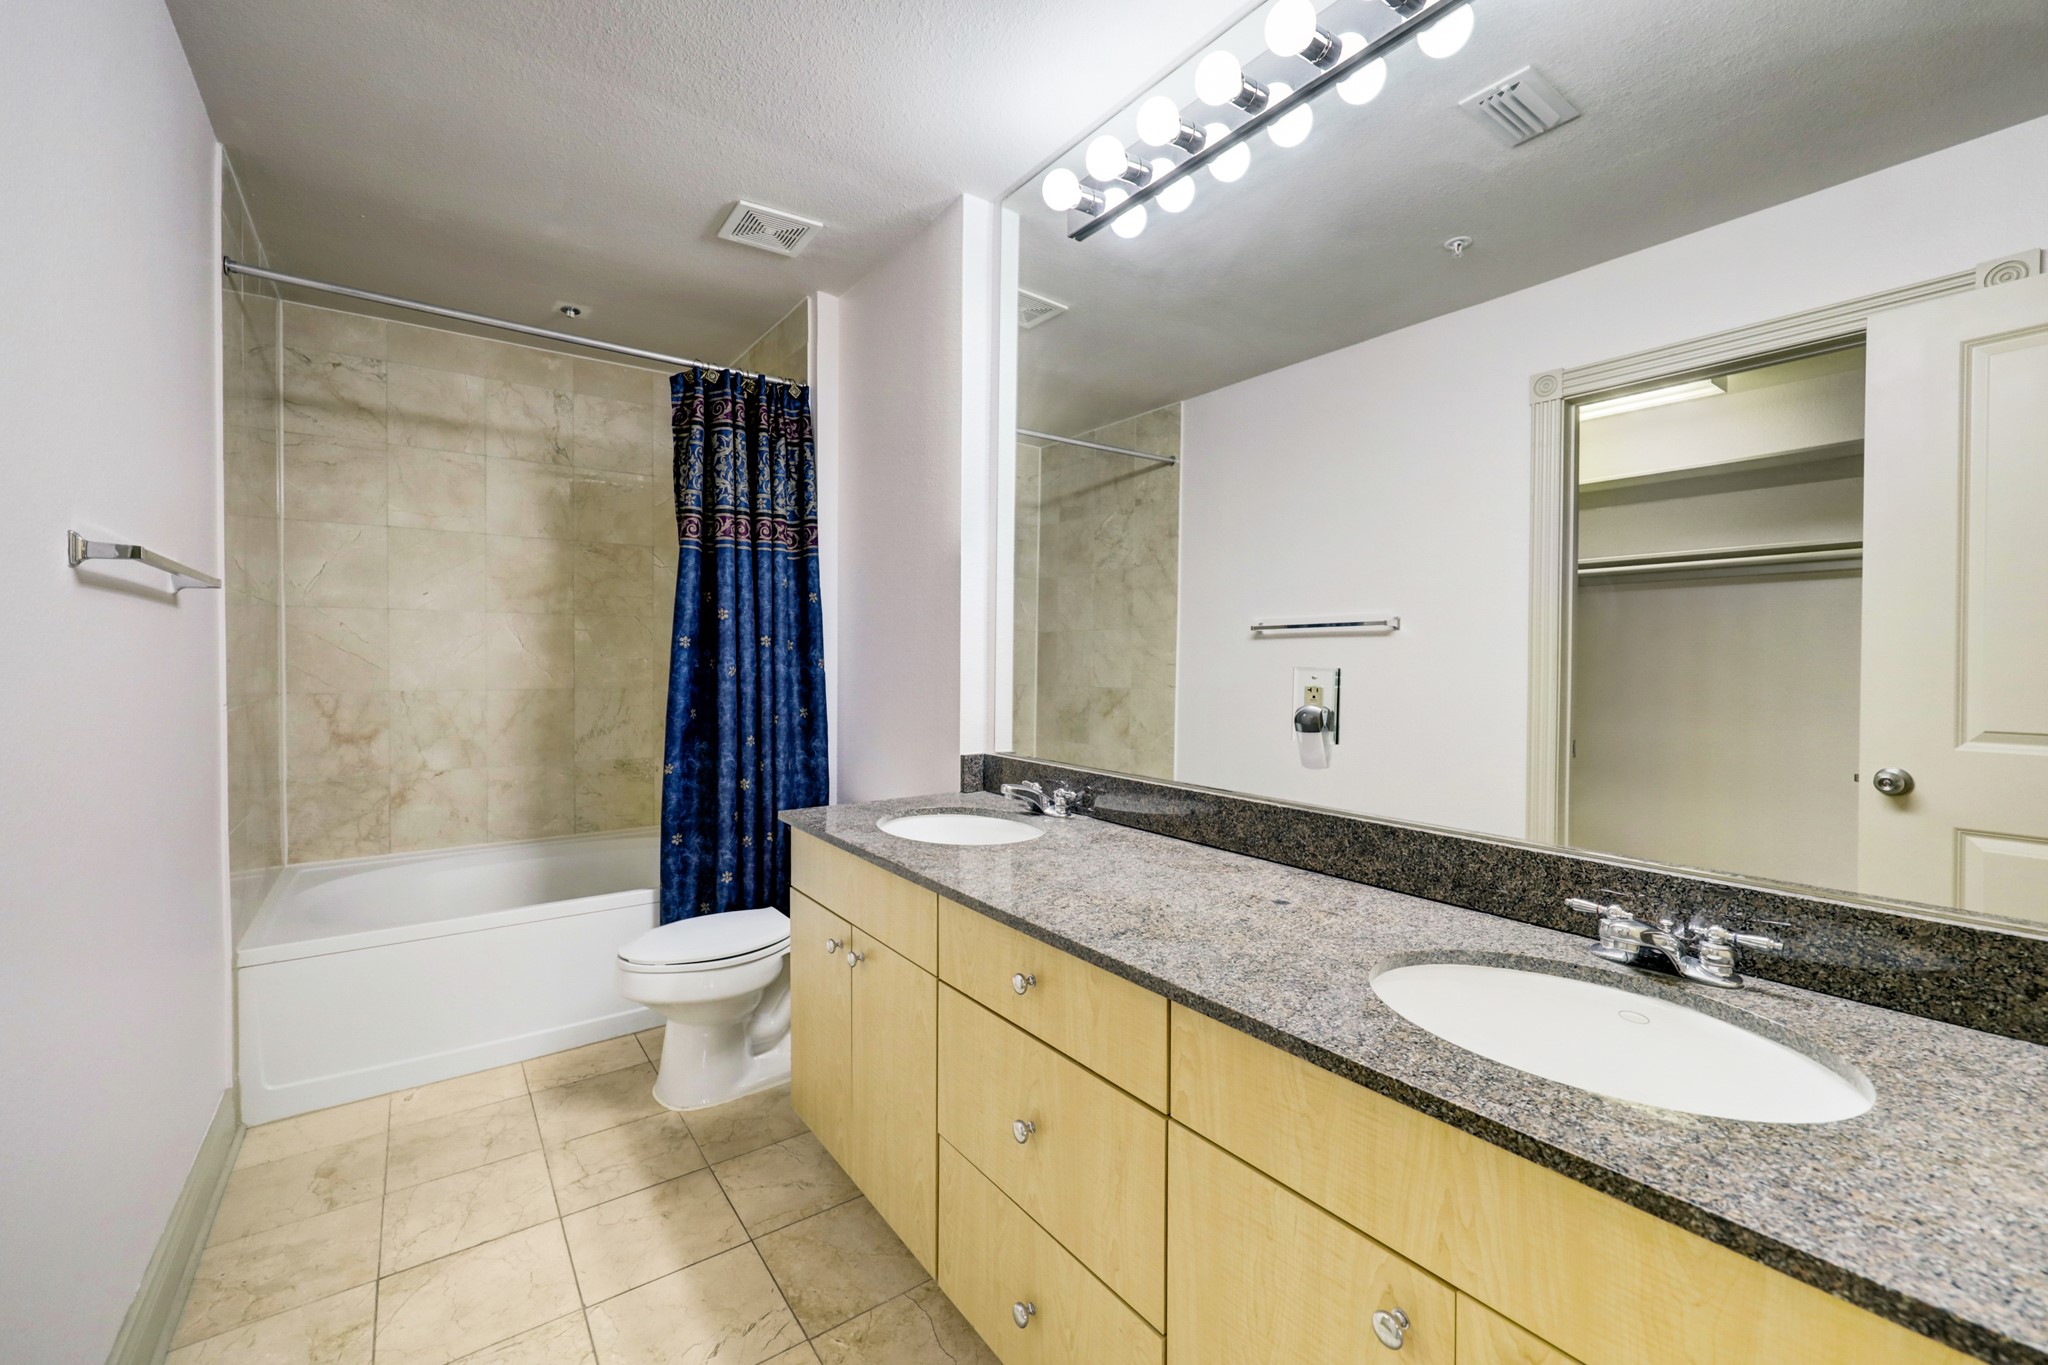 Primary Bath - with double undermount sinks, Hollywood vanity lights, spacious cabinetry storage and with direct access to primary walk-in closet